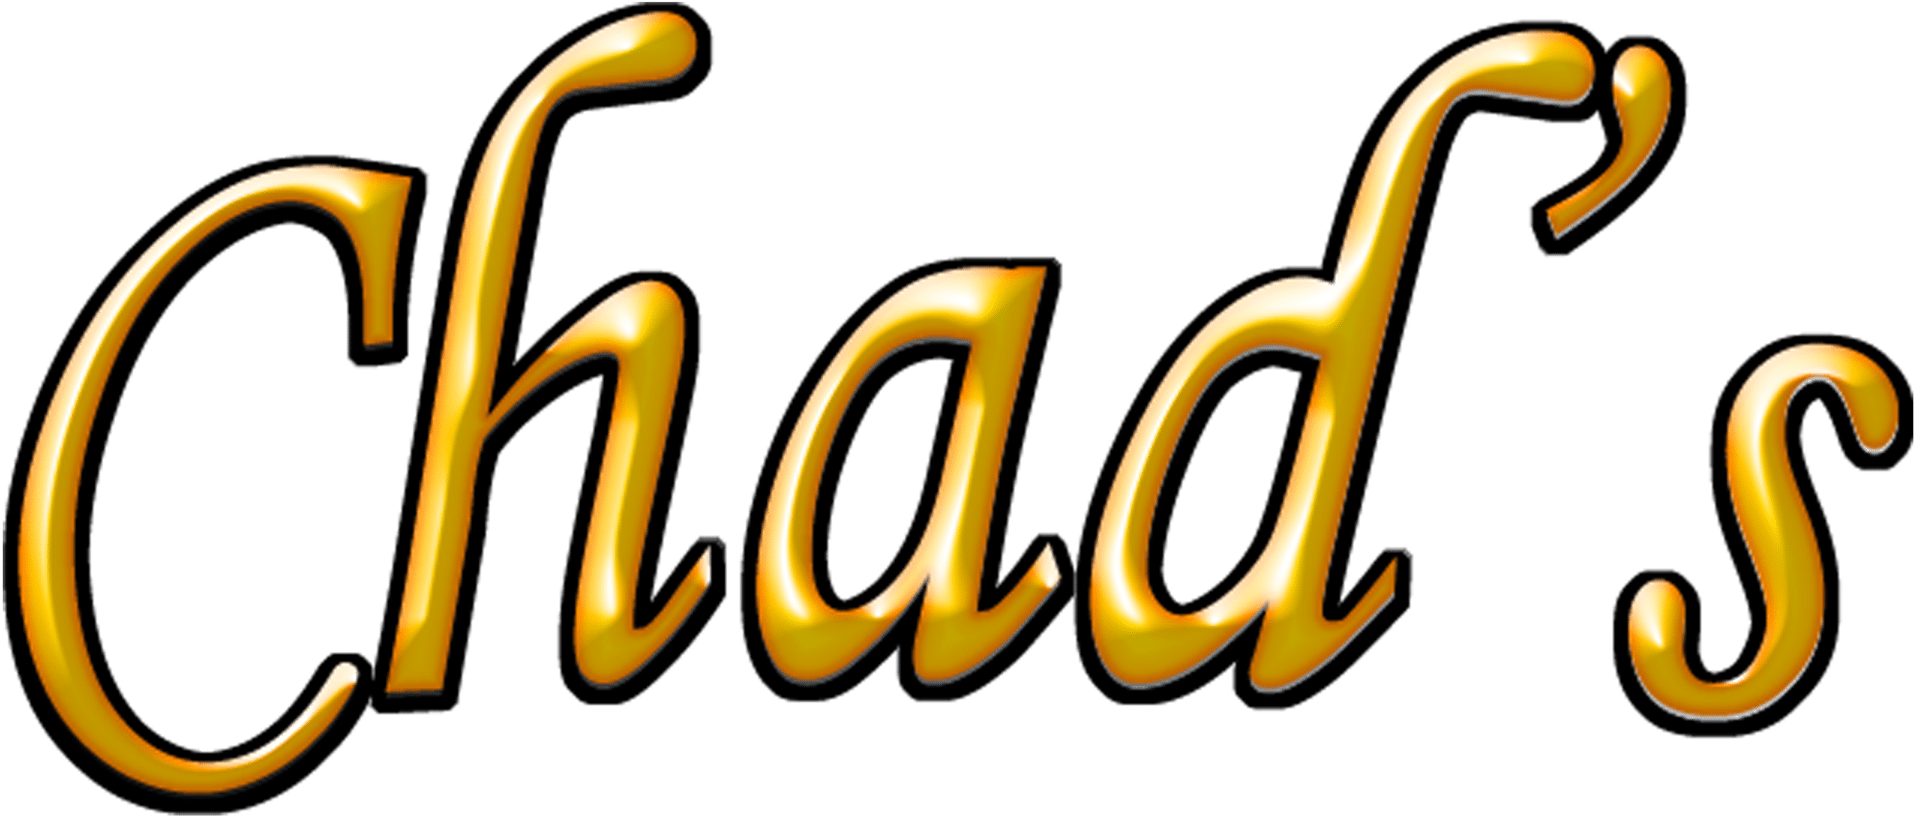 Golden Chad Text Logo PNG